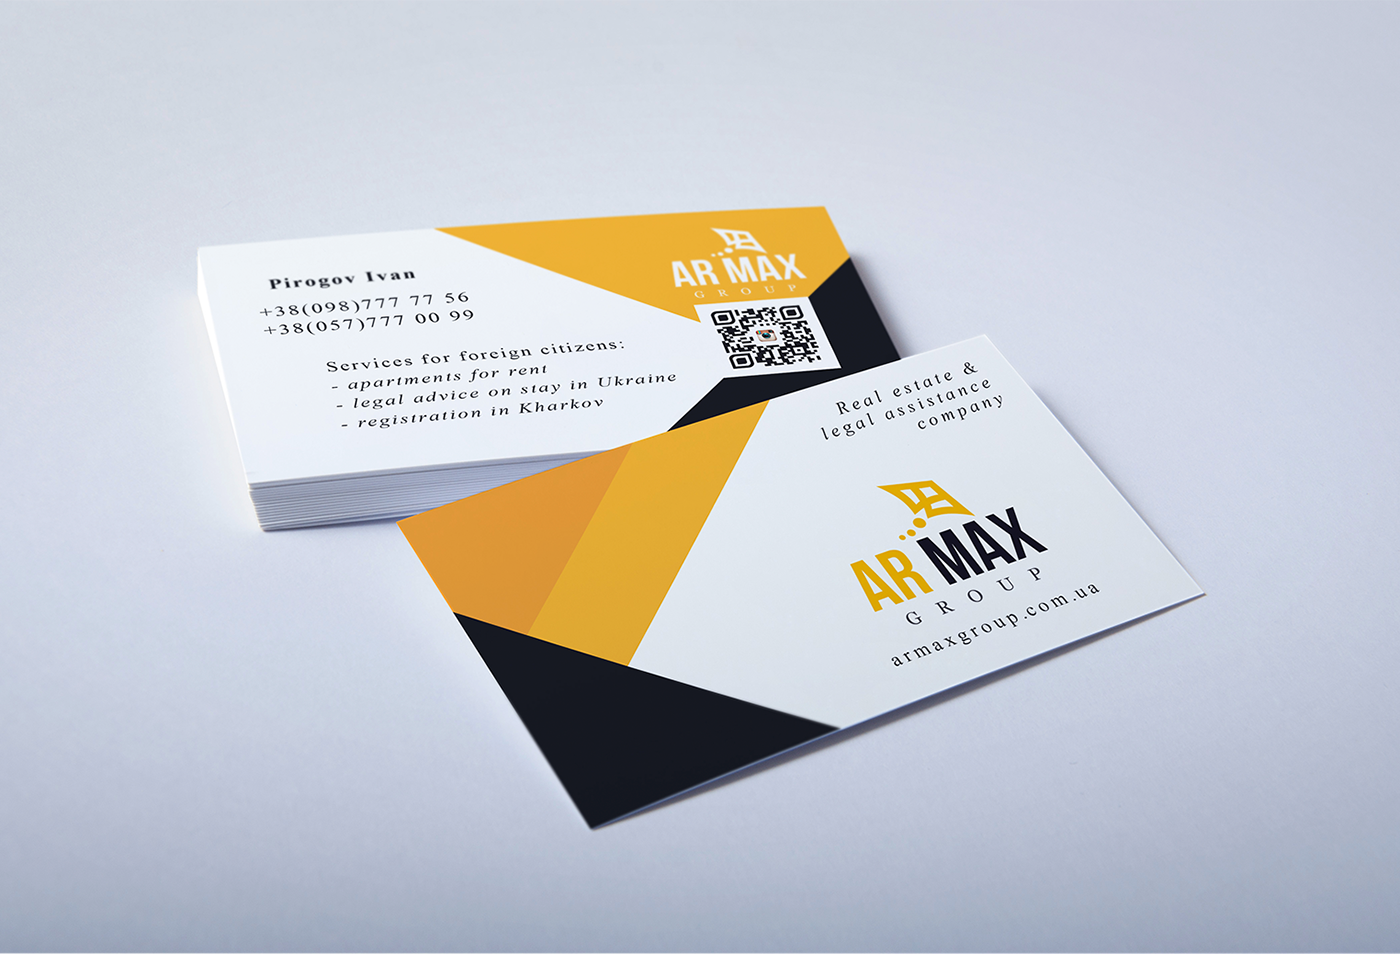 logo business card company services real estate legal assistance brending kharkov flyer yellow card black